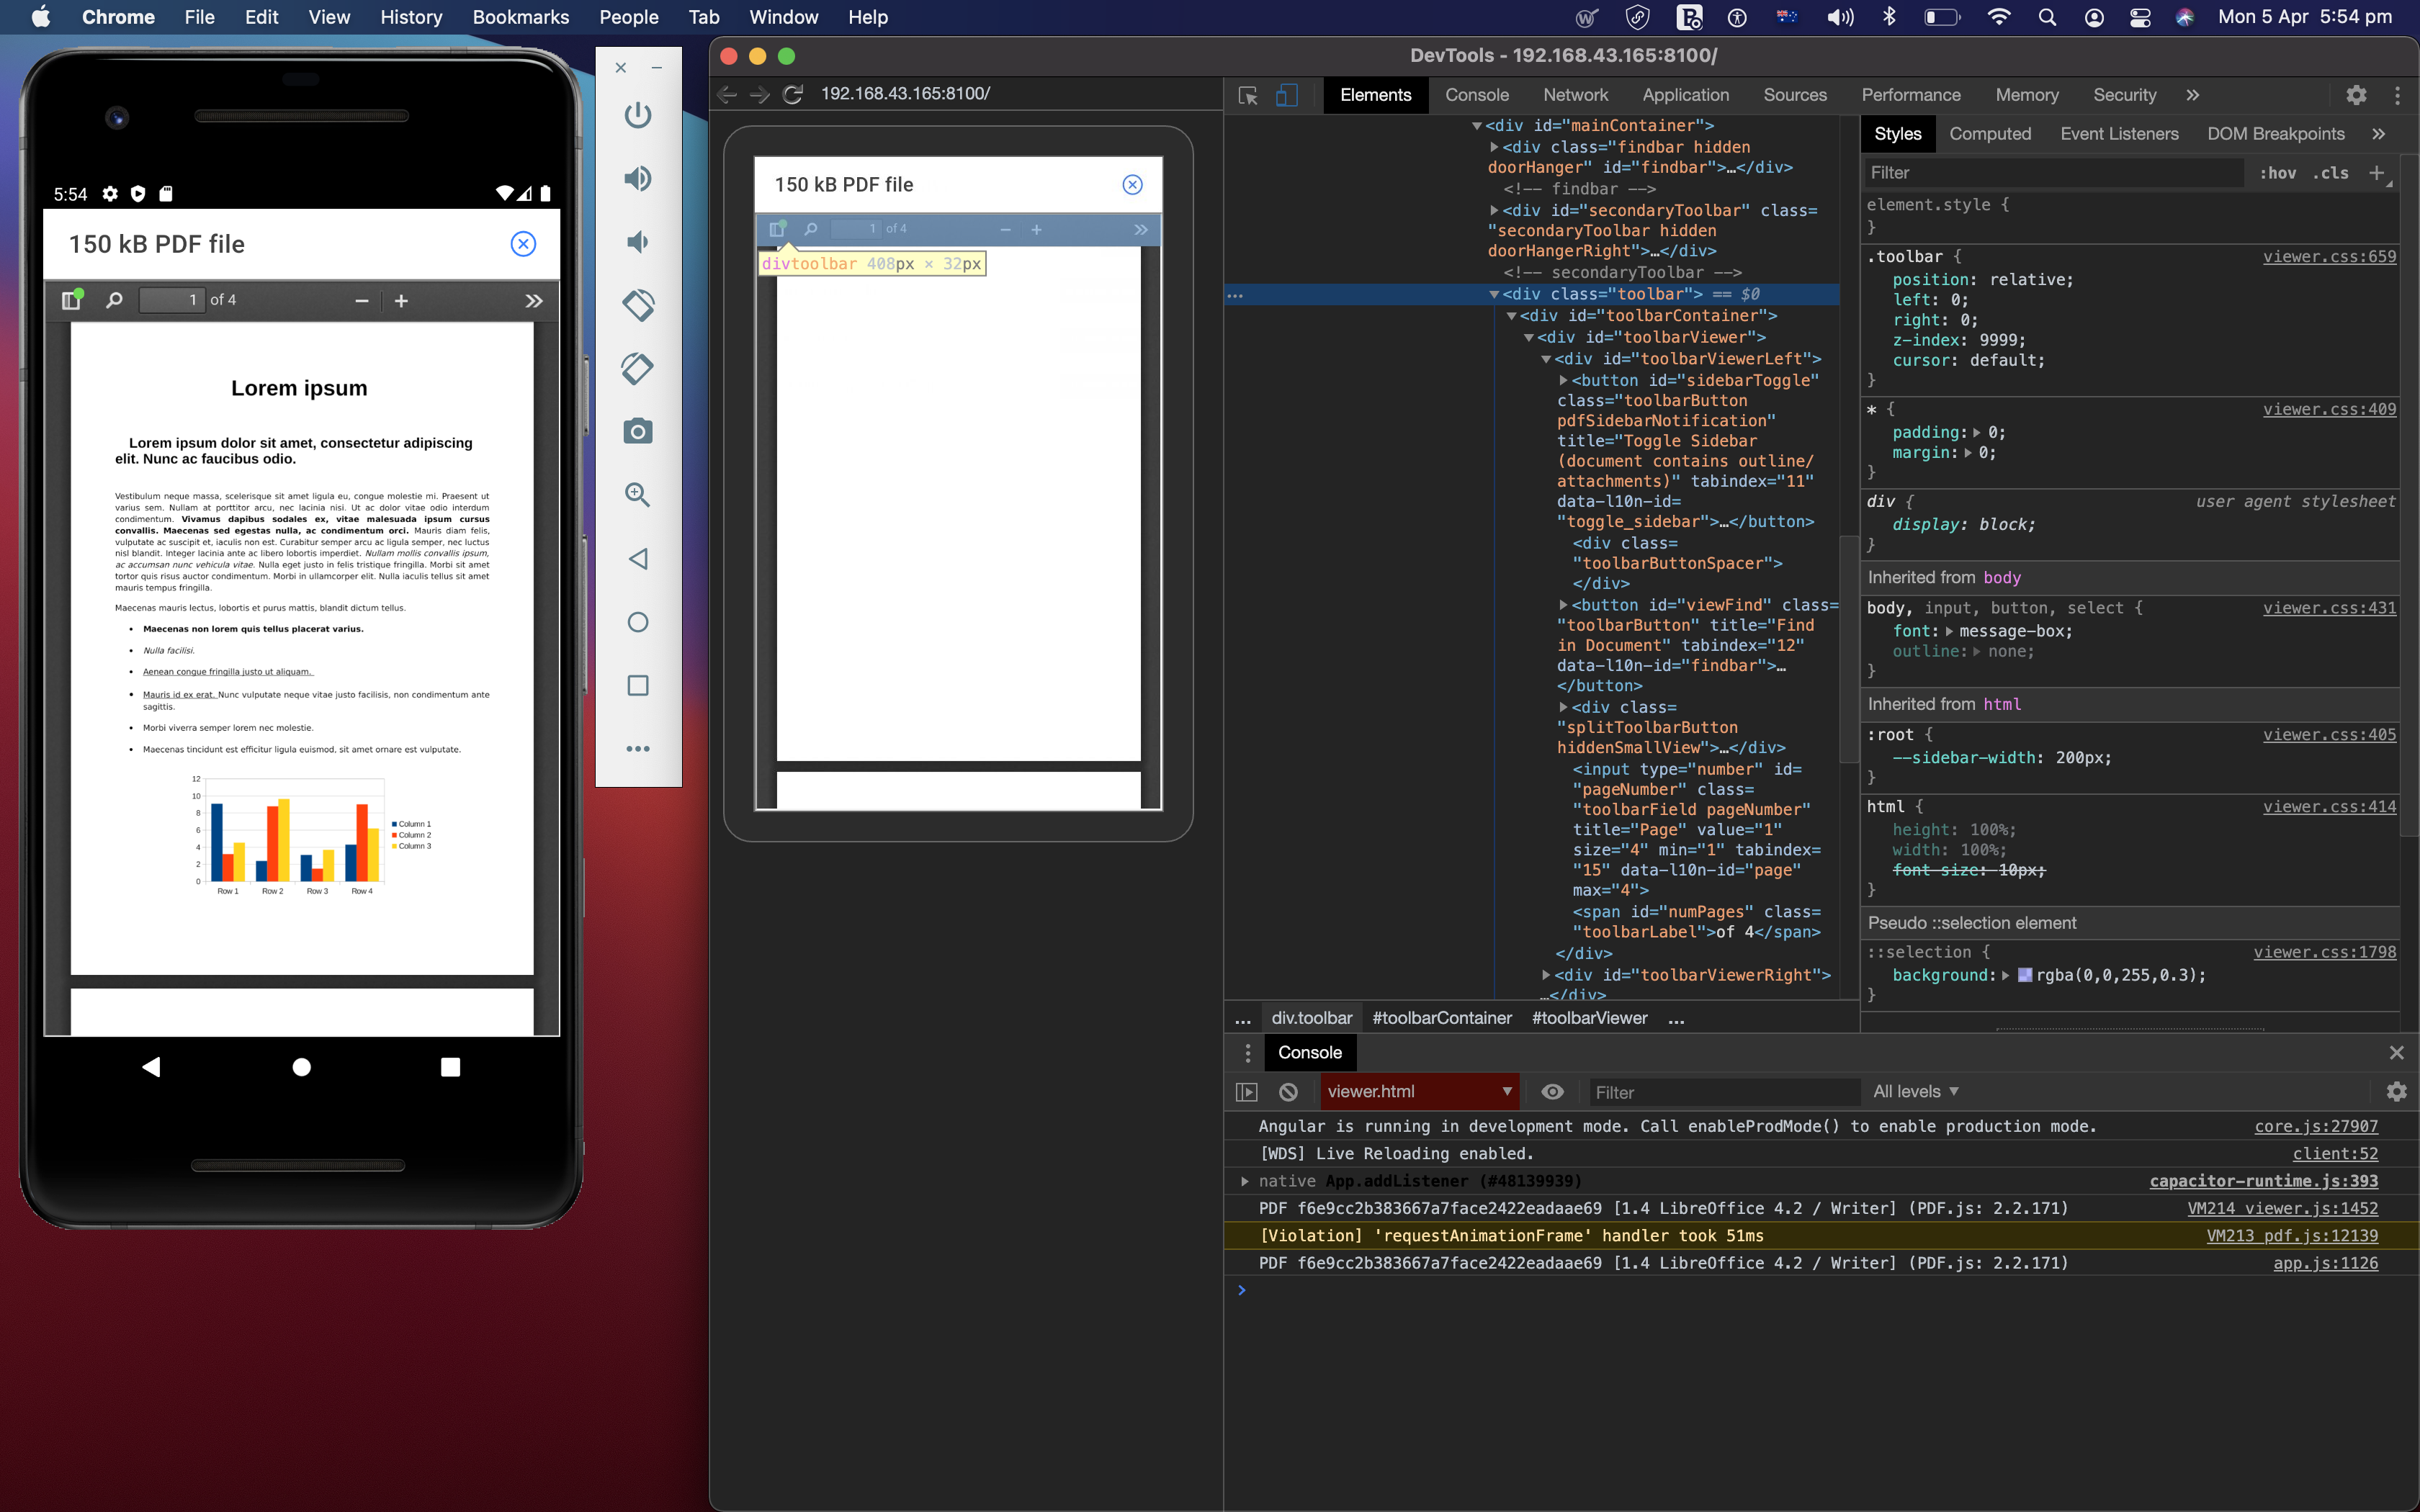 Remote debugging using Chrome DevTools running the app on Android simulator